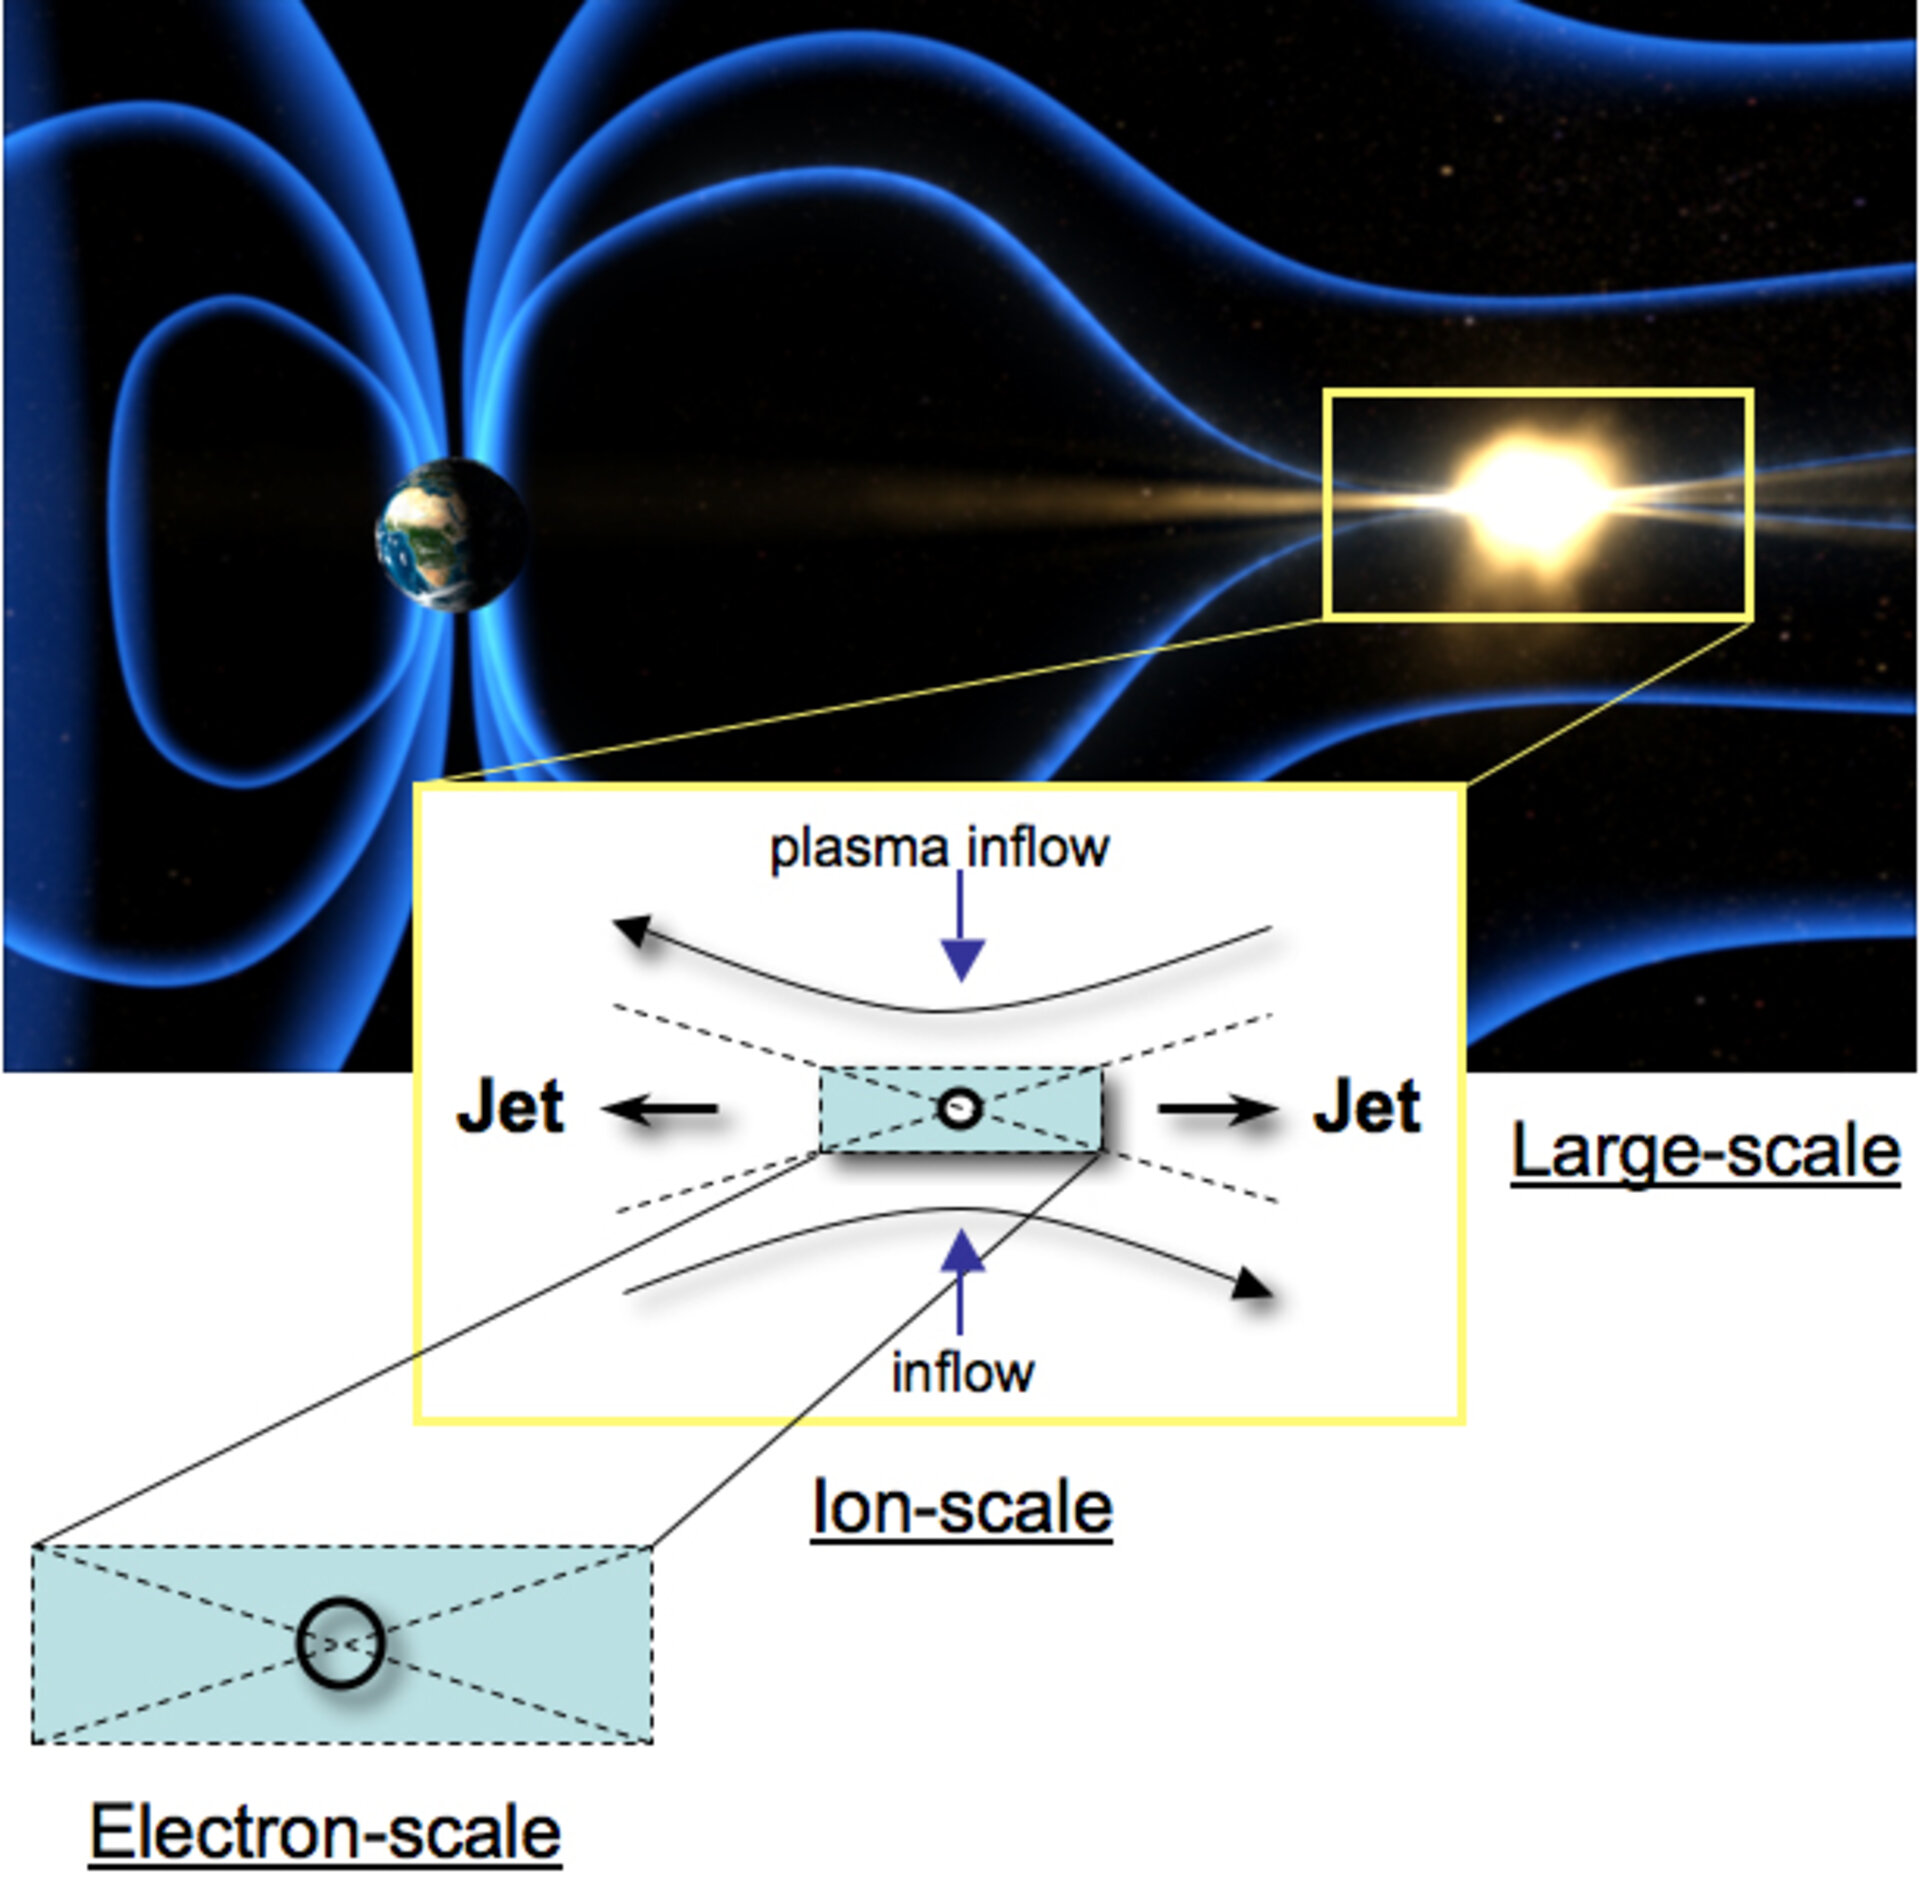 The scales of magnetic reconnection